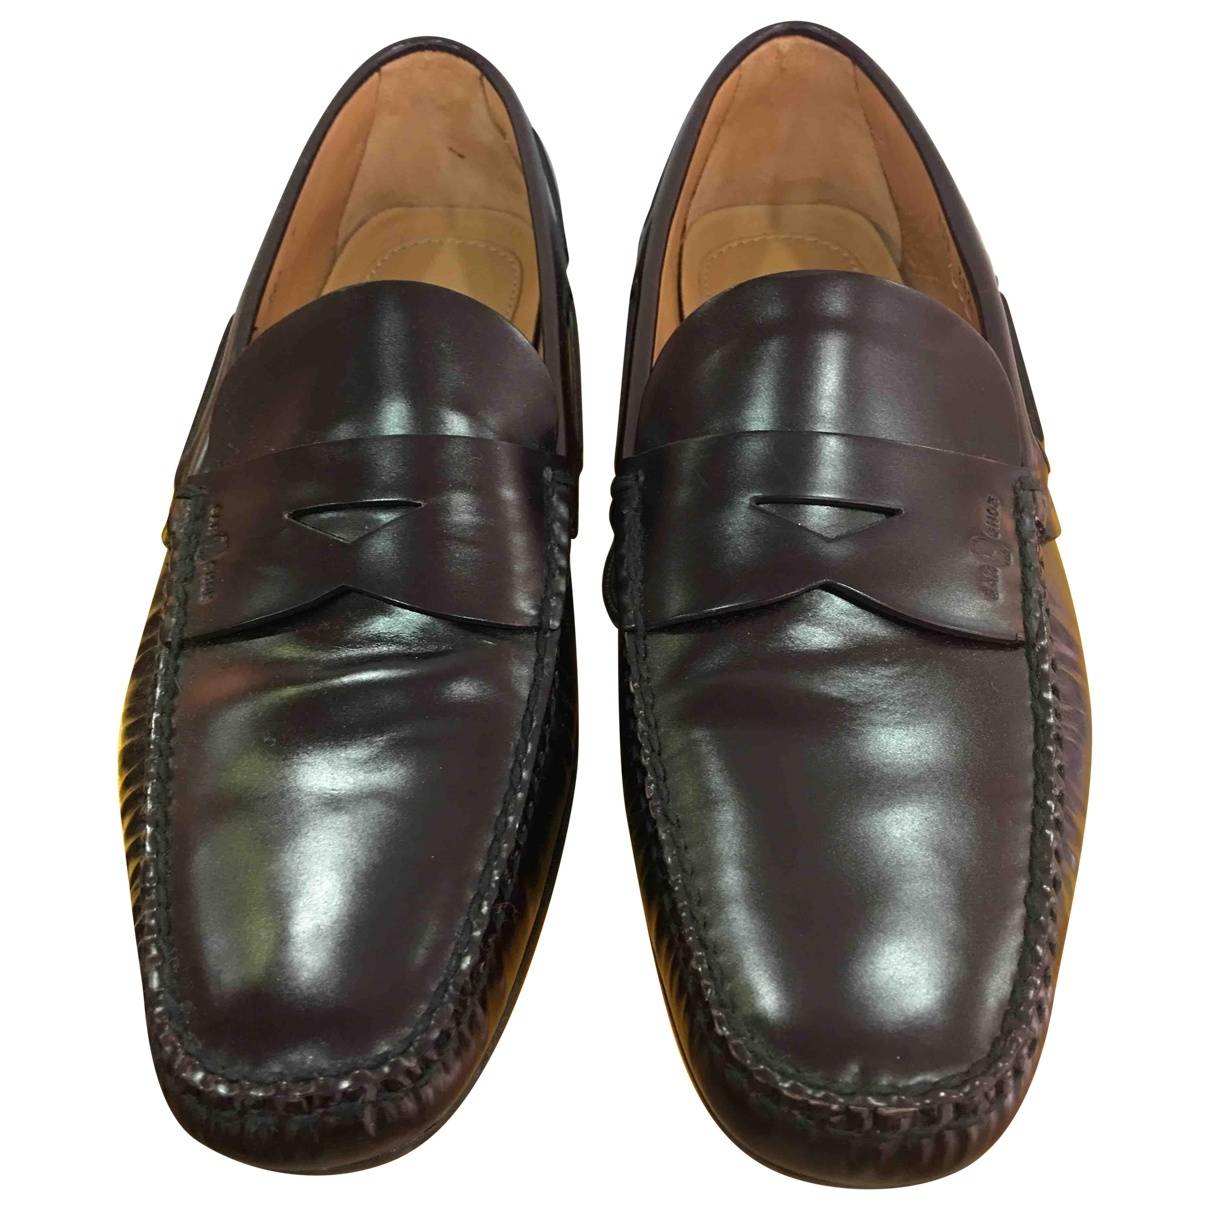 Leather flats Carshoe